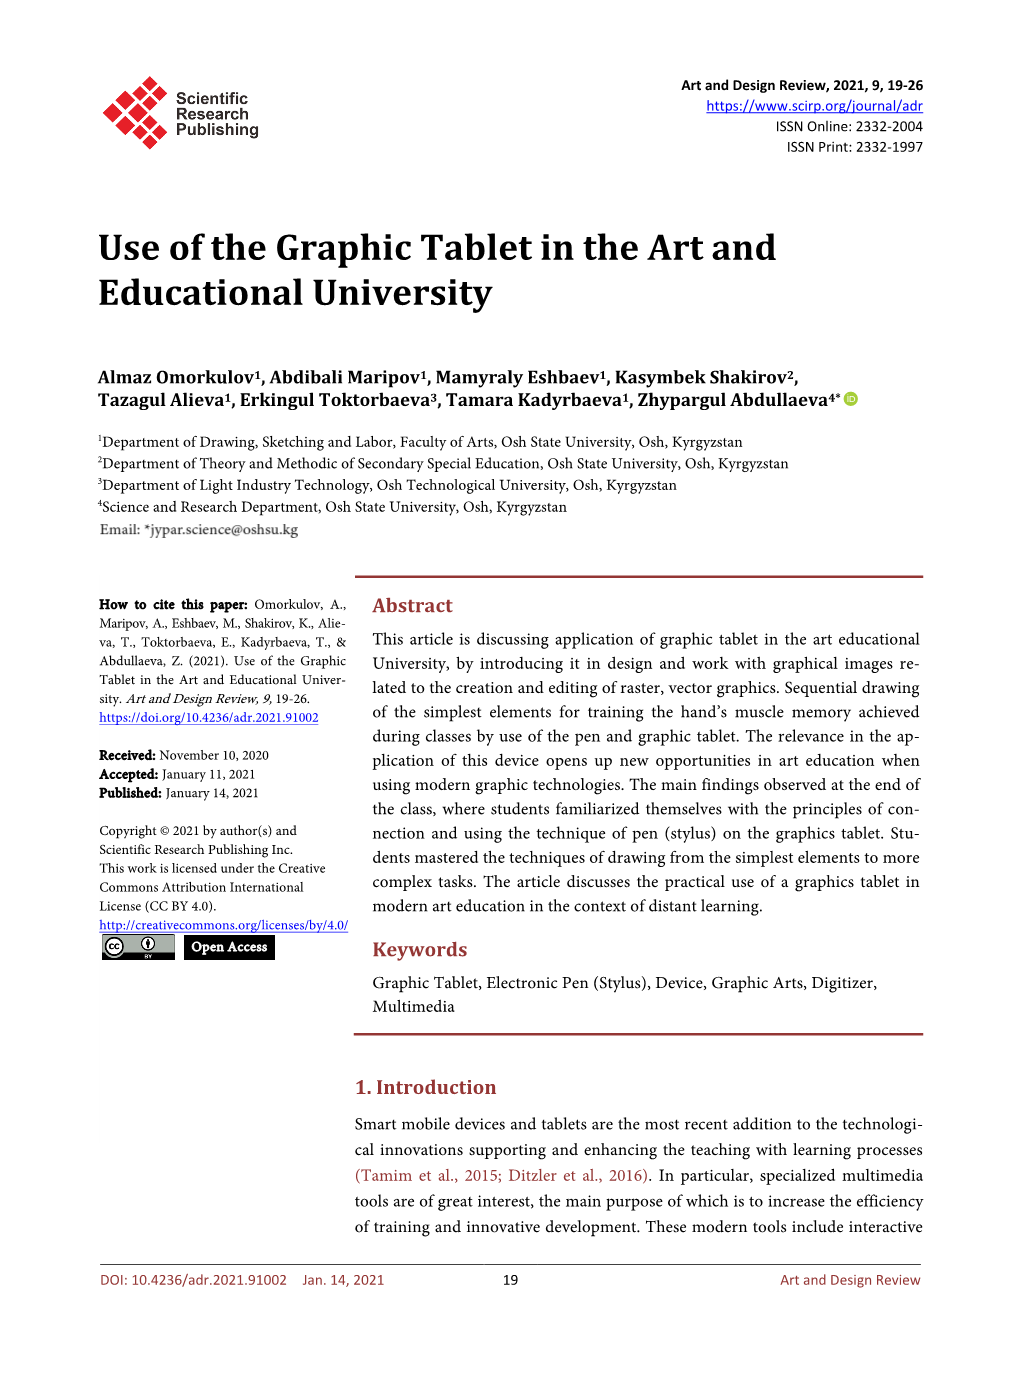 Use of the Graphic Tablet in the Art and Educational University